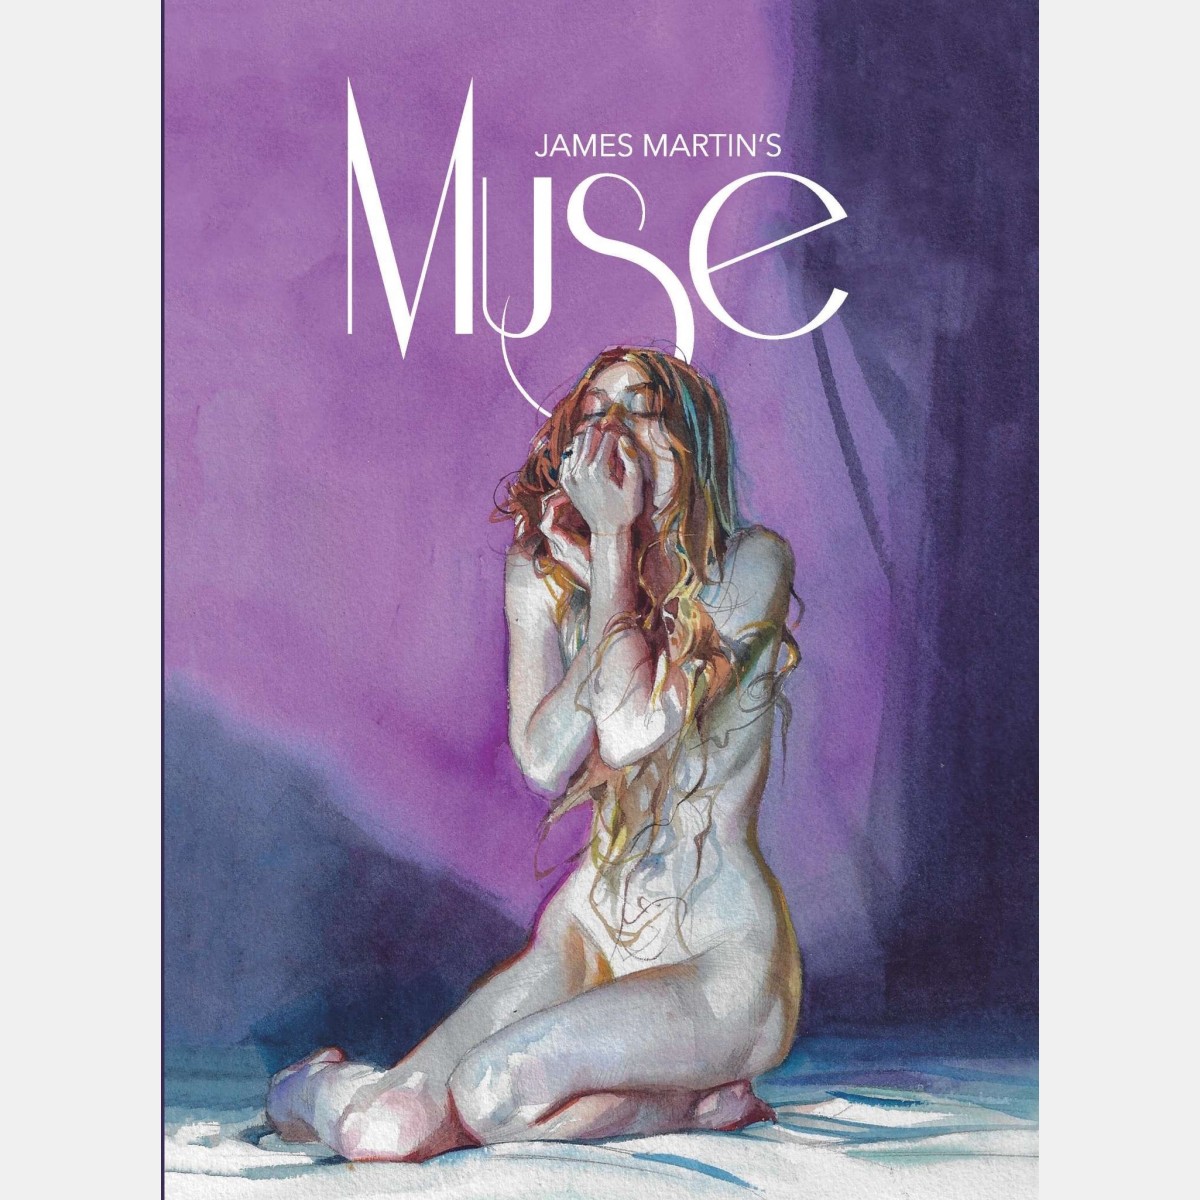 James Martin's MUSE : An exploration of the female form